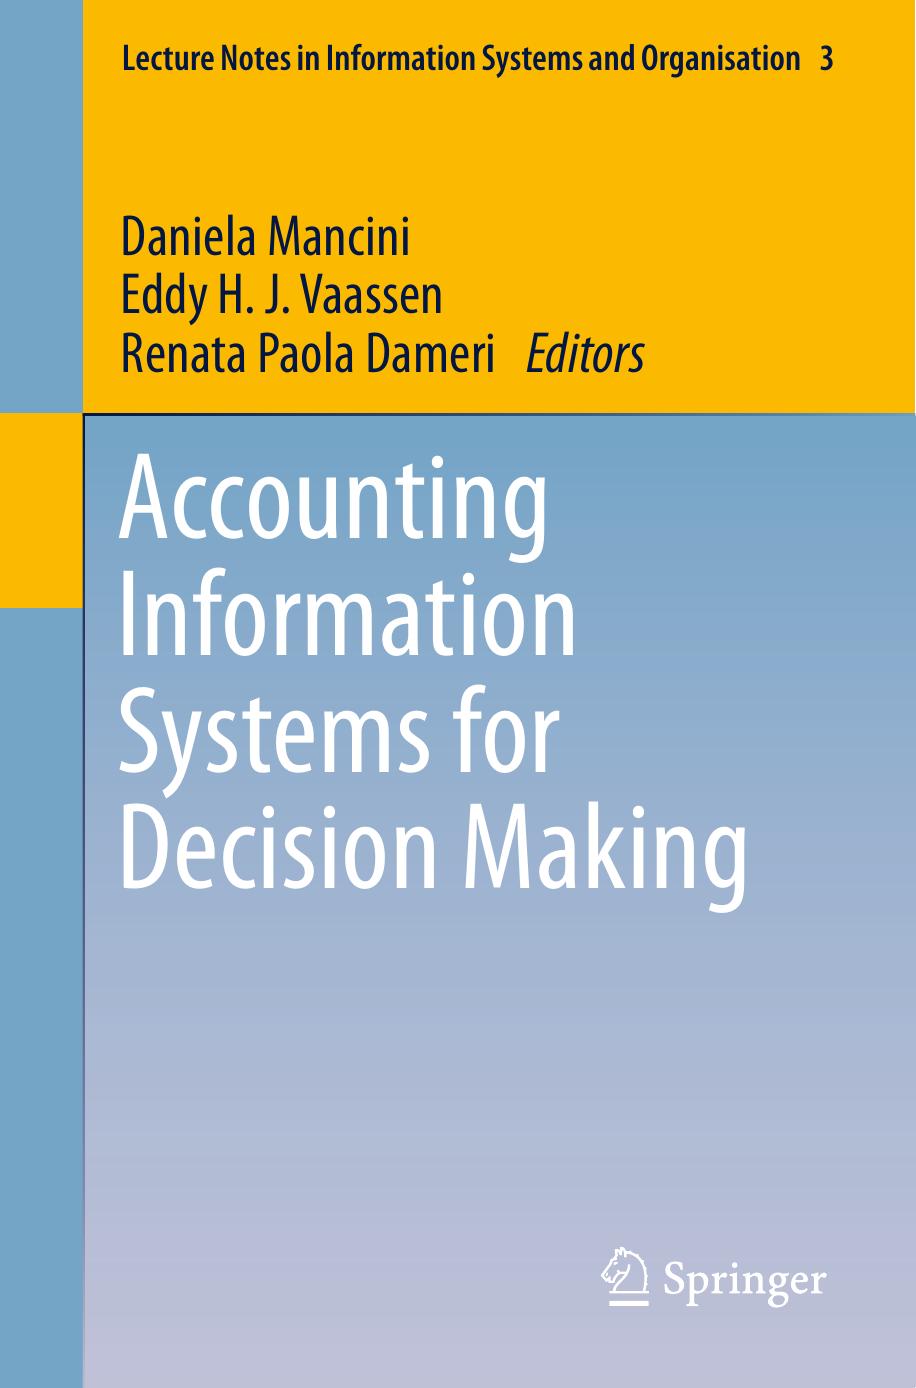 Accounting Information Systems for Decision Making ( PDFDrive ) 2013